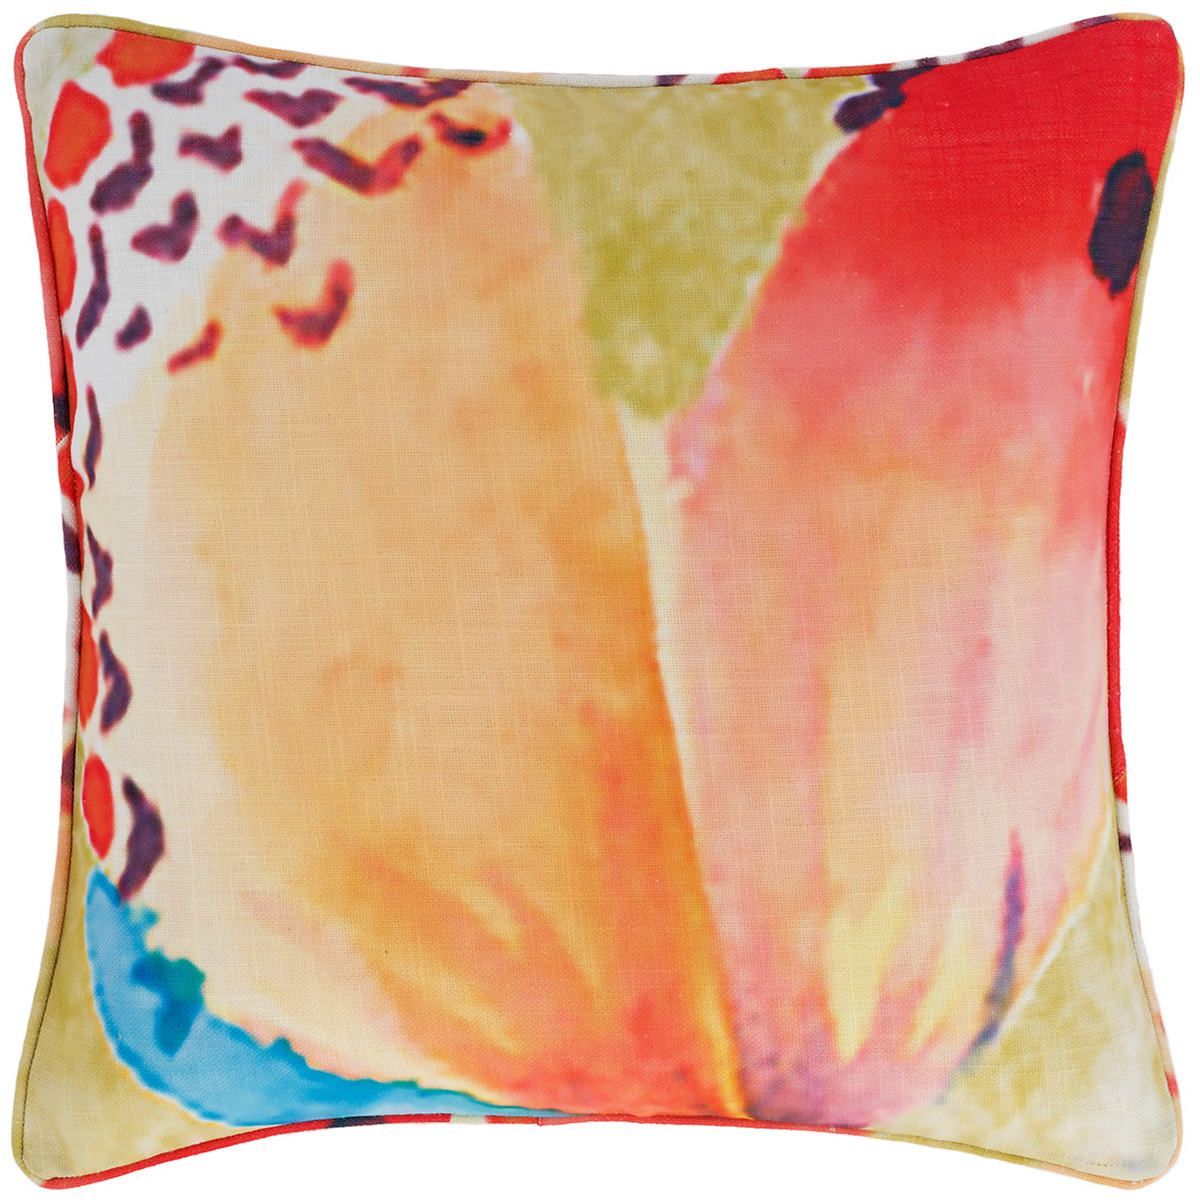 New! Cryptic Indoor/Outdoor Decorative Pillow | Annie Selke